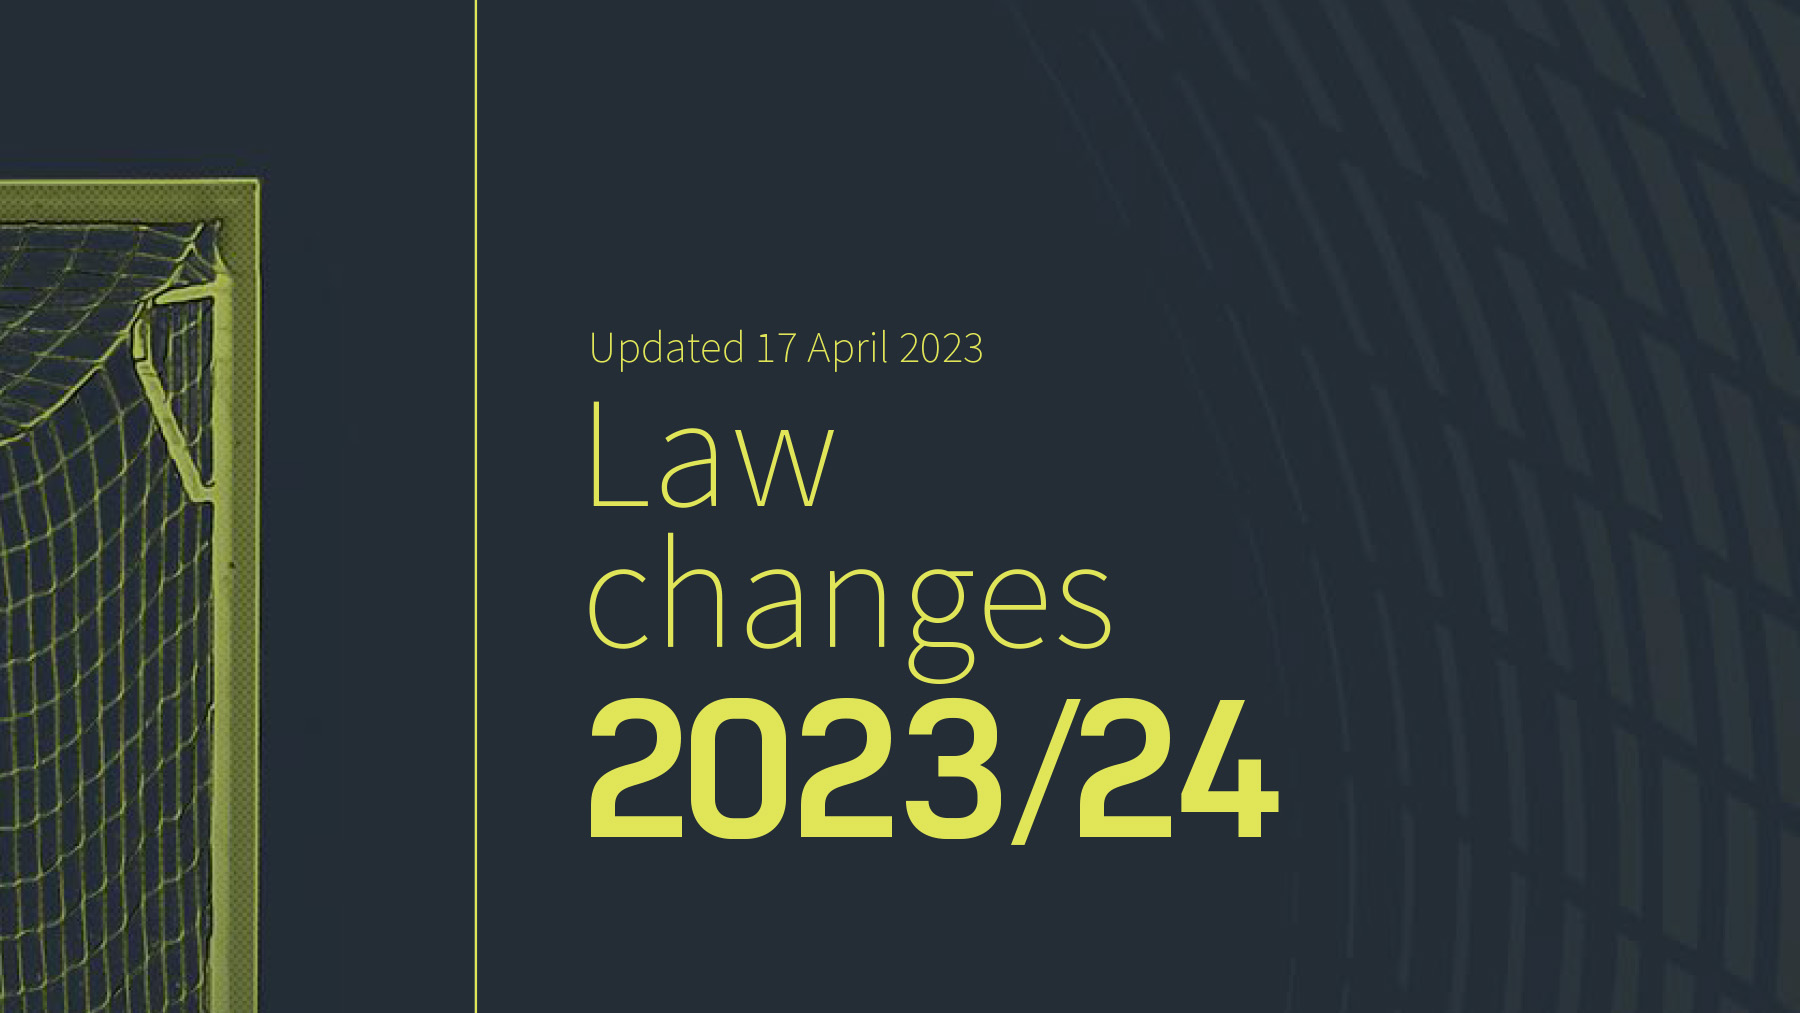 The latest law changes to the Laws of the Game 2023-2024.